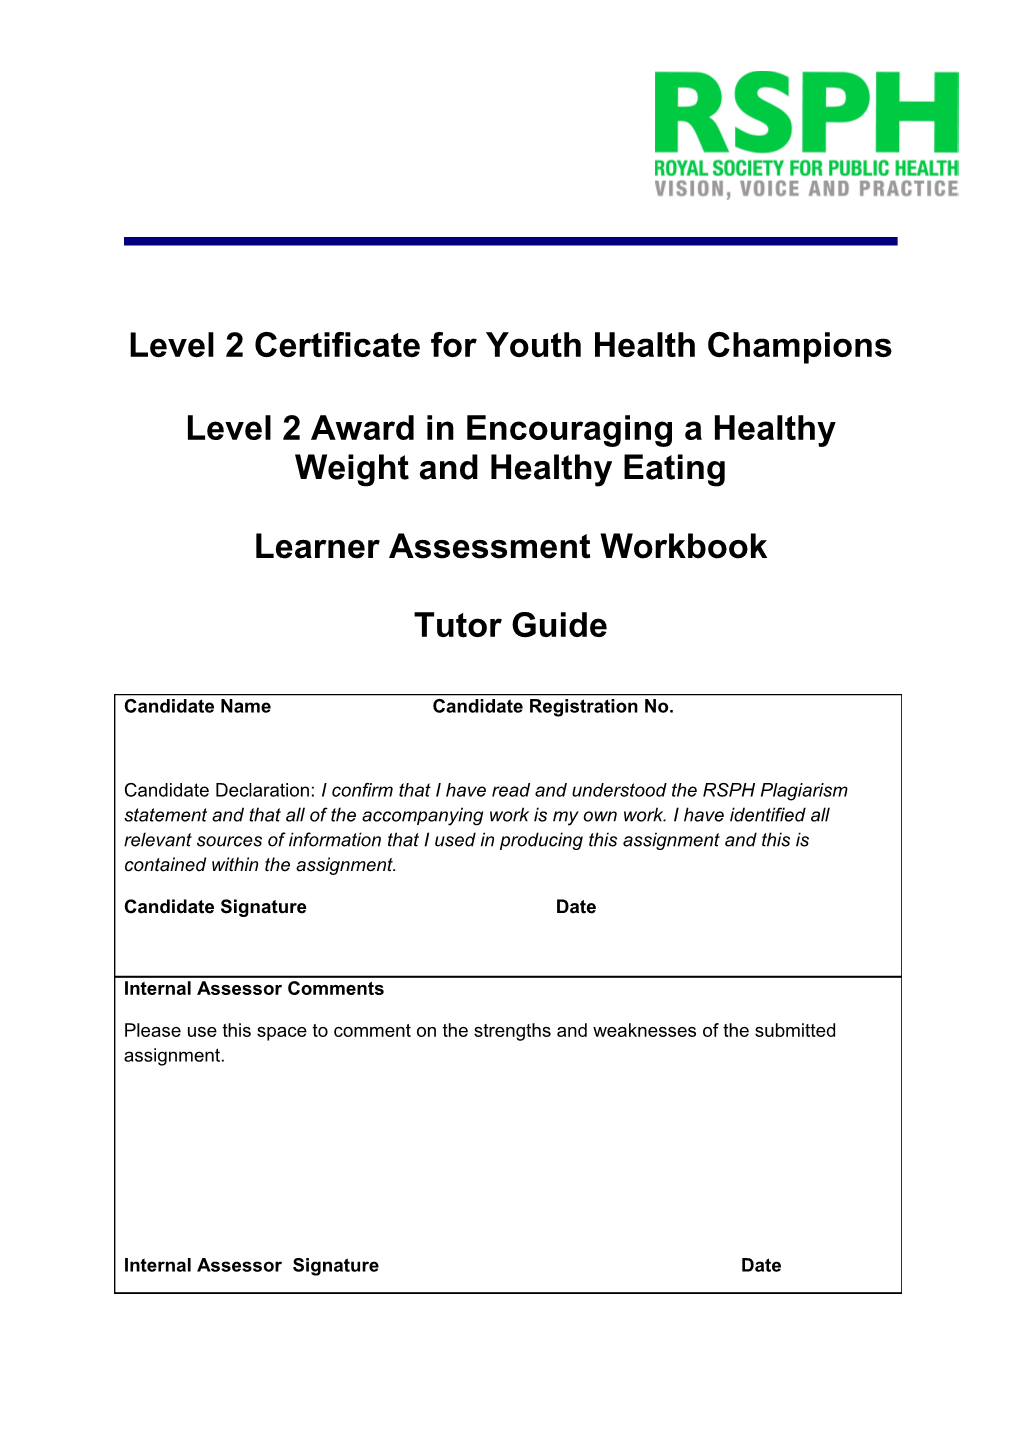 Level 2 Certificate for Youth Health Champions